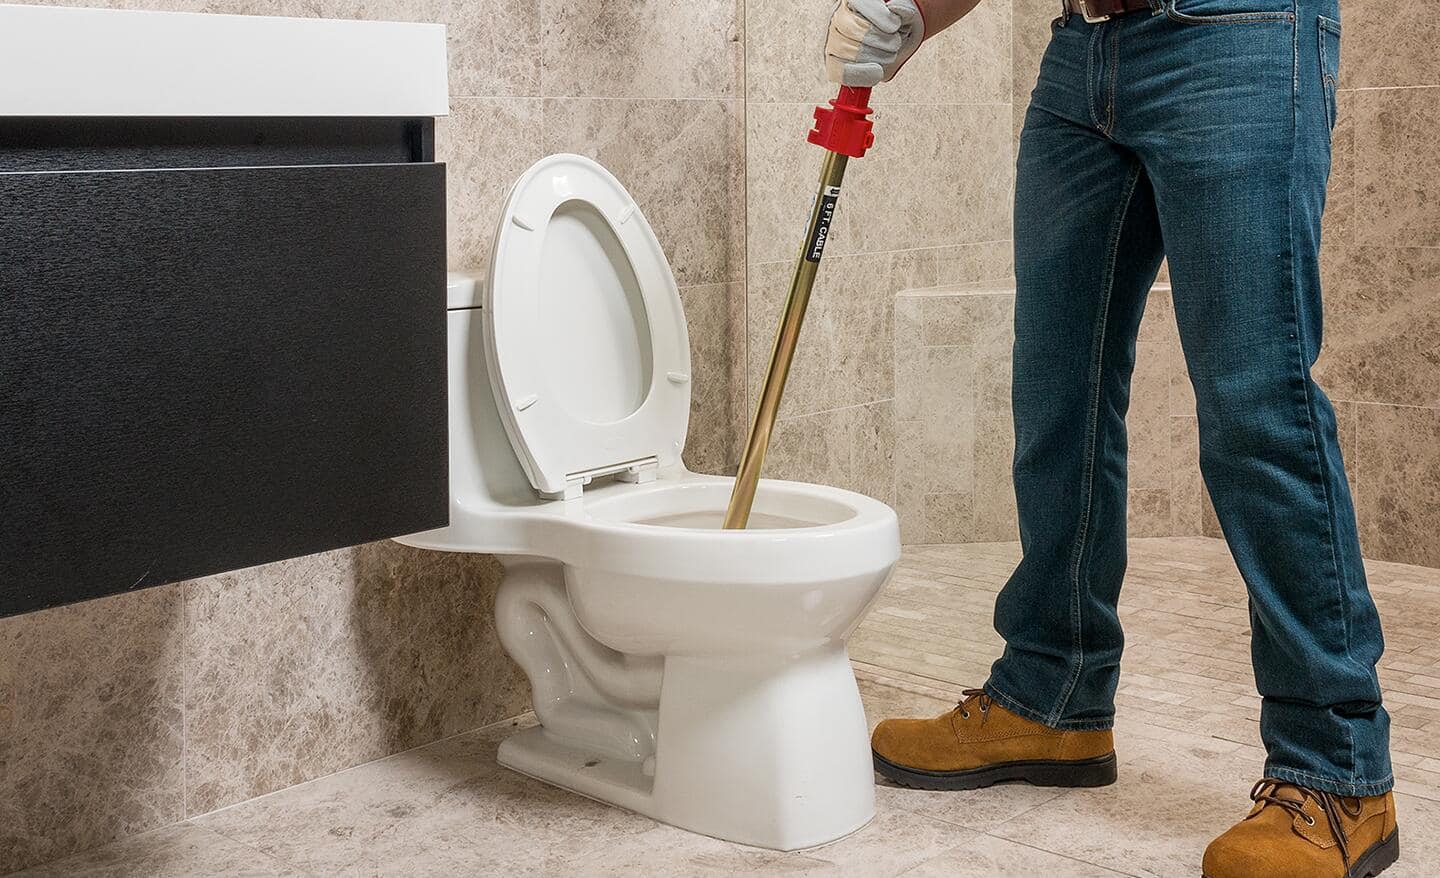 A person uses a plumbing snake to unclog a toilet.